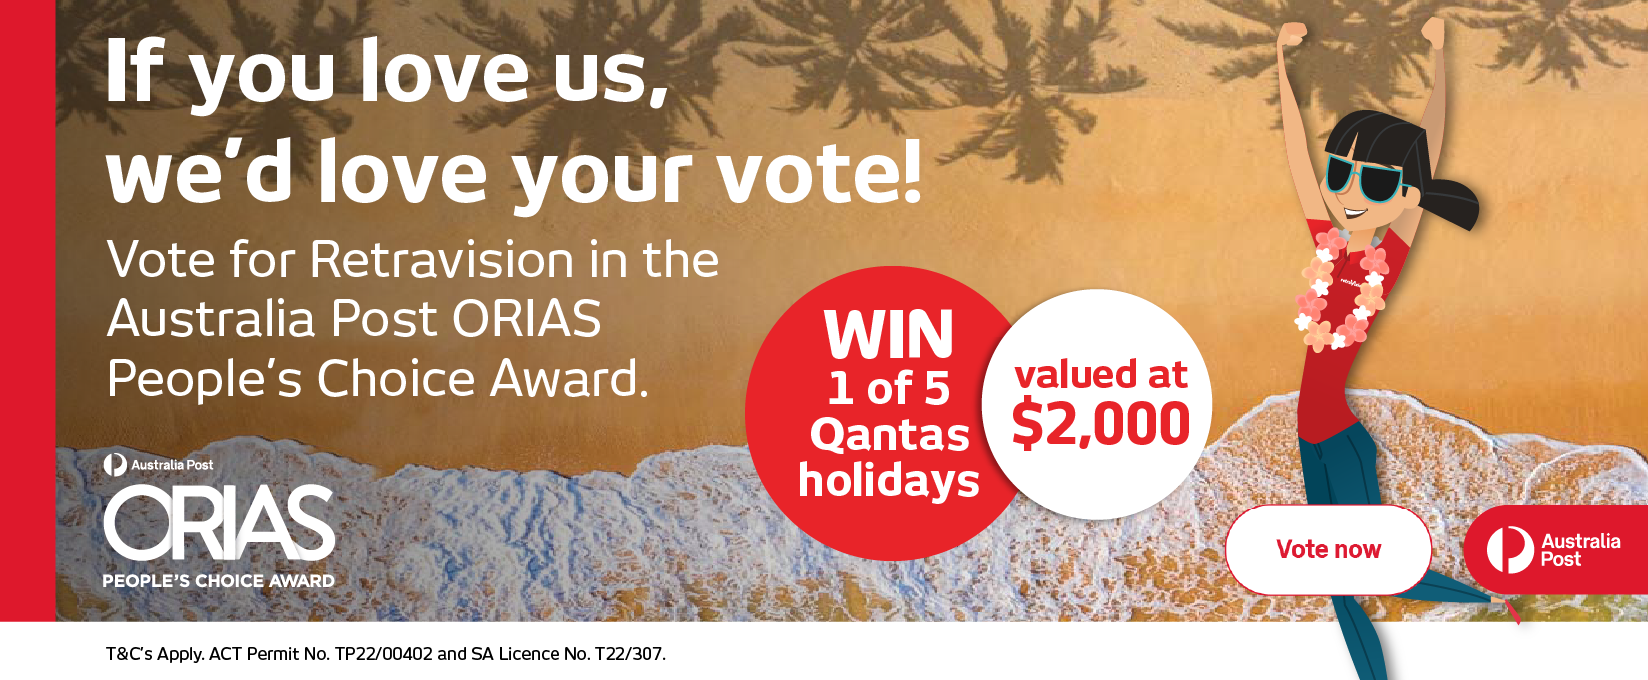 ORIAS Peoples Choice Award - Vote For Us at Retravision